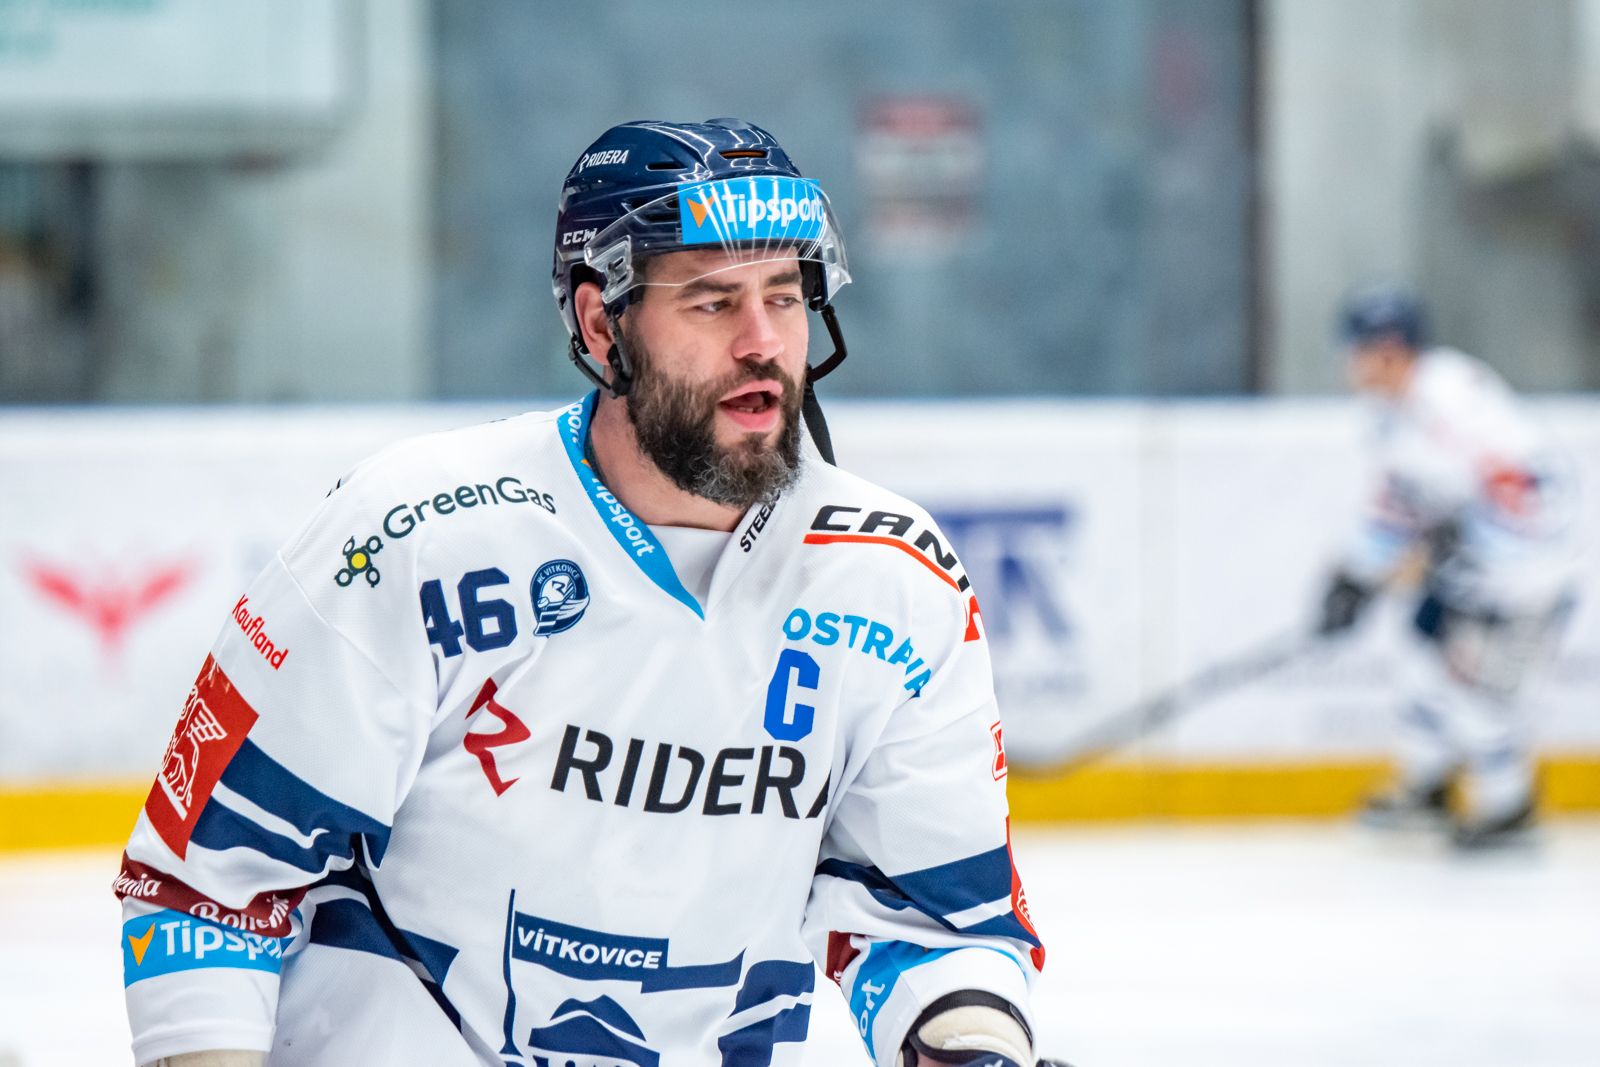 End.  Defender Vítkovice Polák closes his career, playing nearly 900 games in the NHL